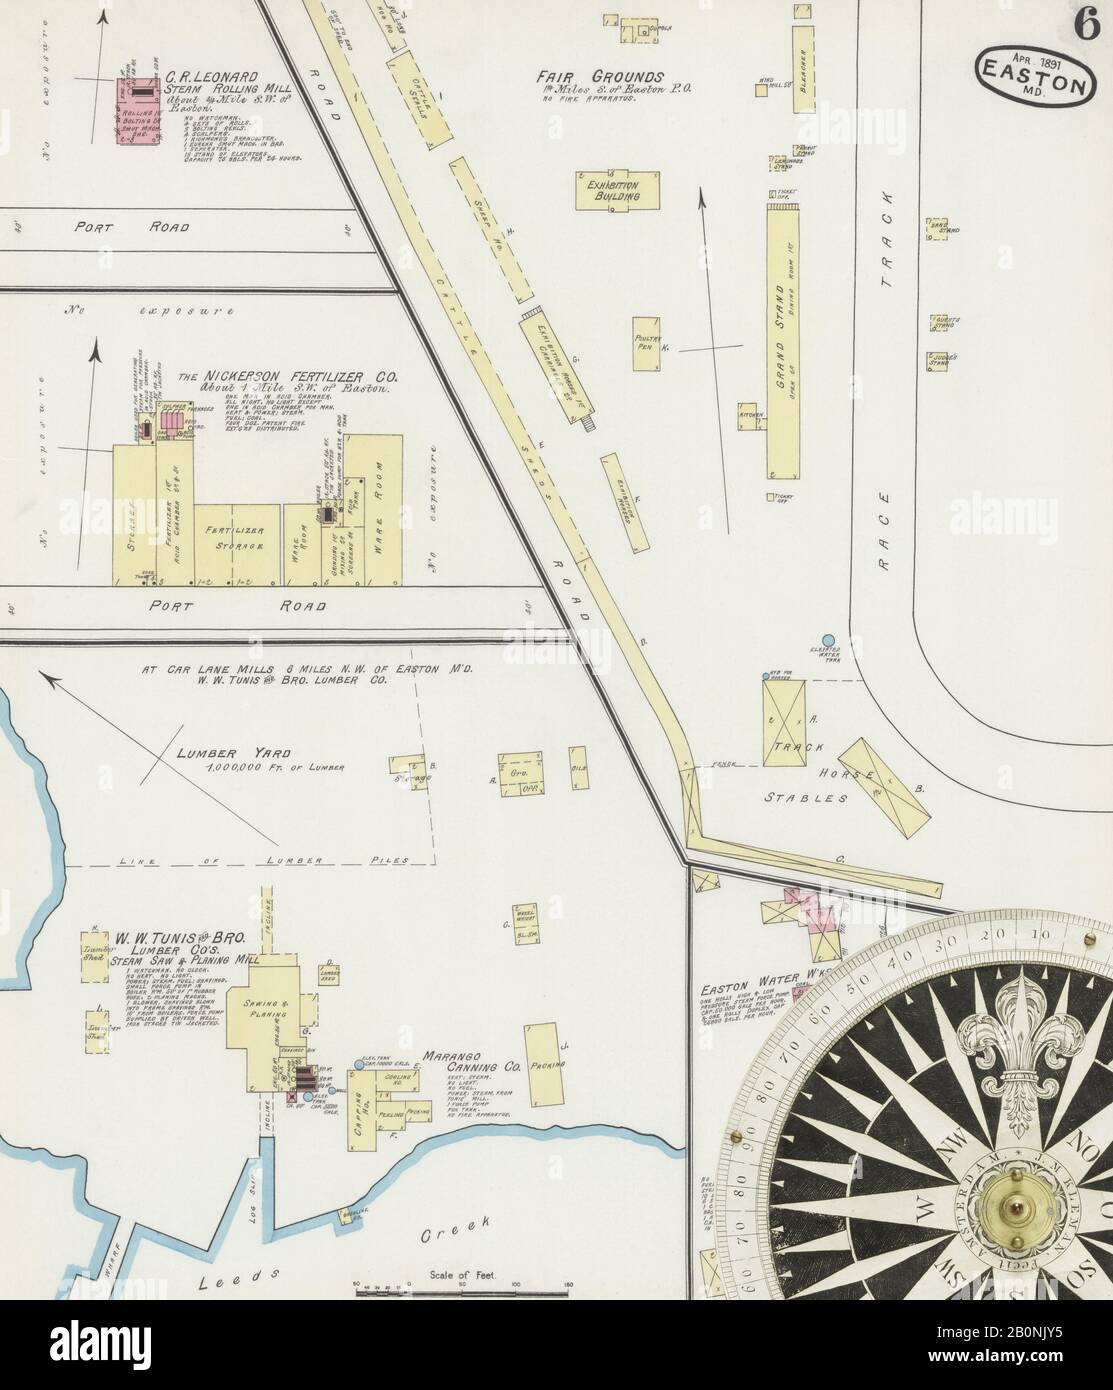 Image 6 of Sanborn Fire Insurance Map from Easton, Talbot County, Maryland. Apr 1891. 12 Sheet(s). Includes Saint Michaels, Oxford, Trappe, America, street map with a Nineteenth Century compass Stock Photo